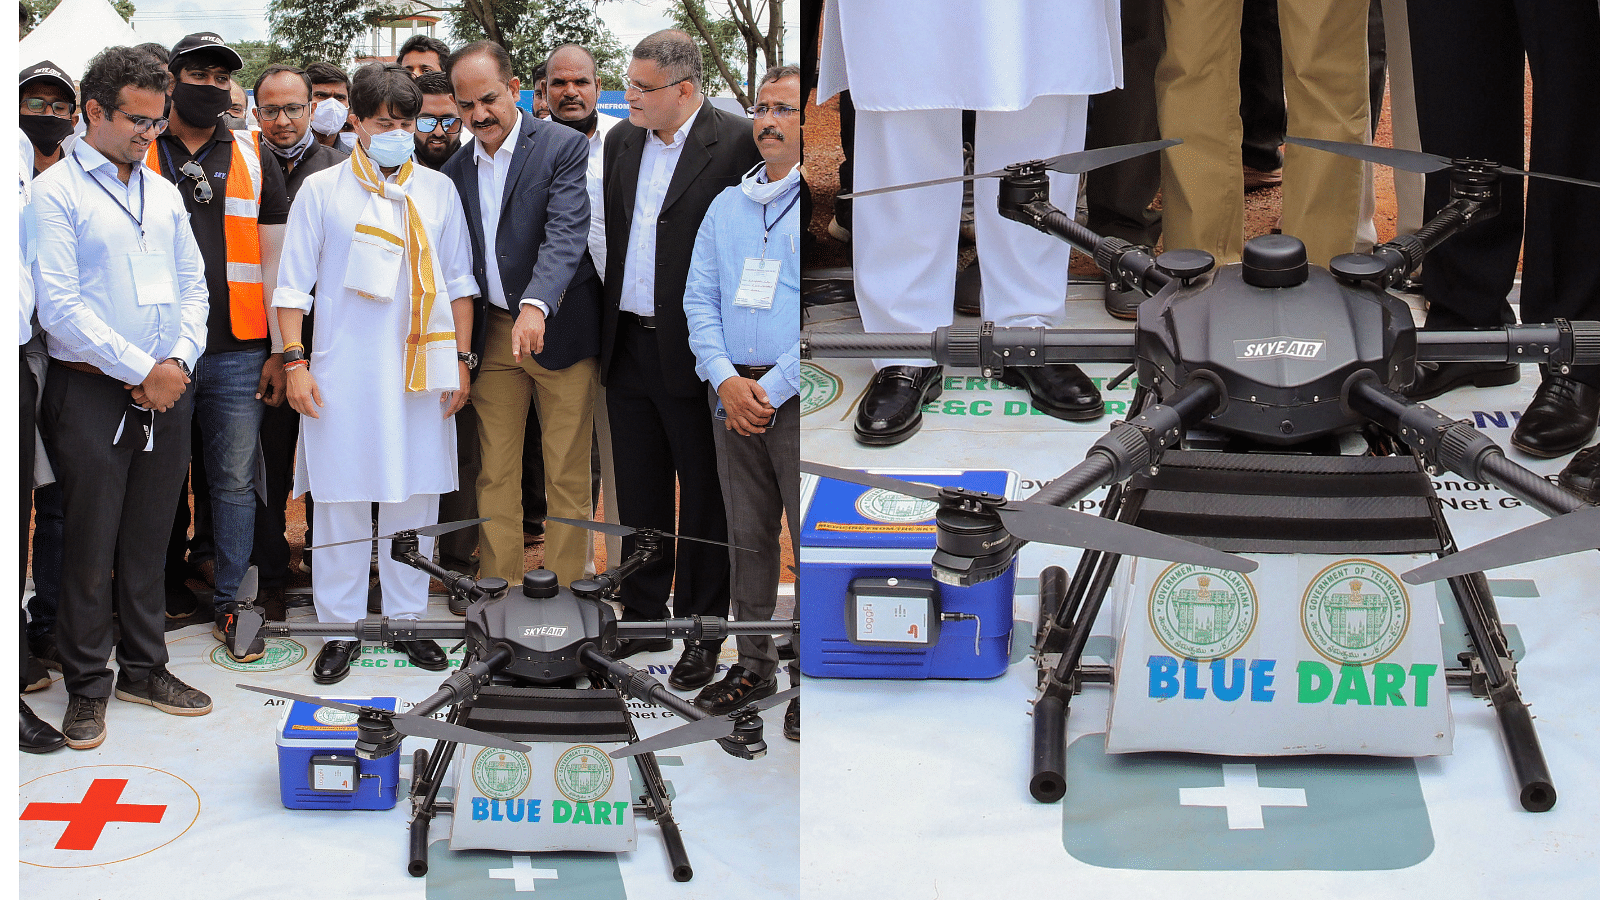 <div class="paragraphs"><p>Hyderabad: Civil Aviation Minister Jyotiraditya M Scindia and IT Minister KT Rama Rao and others witnesses the first ever delivery of medicines and jabs by drone in the Vikarabad district, Telangana.</p></div>